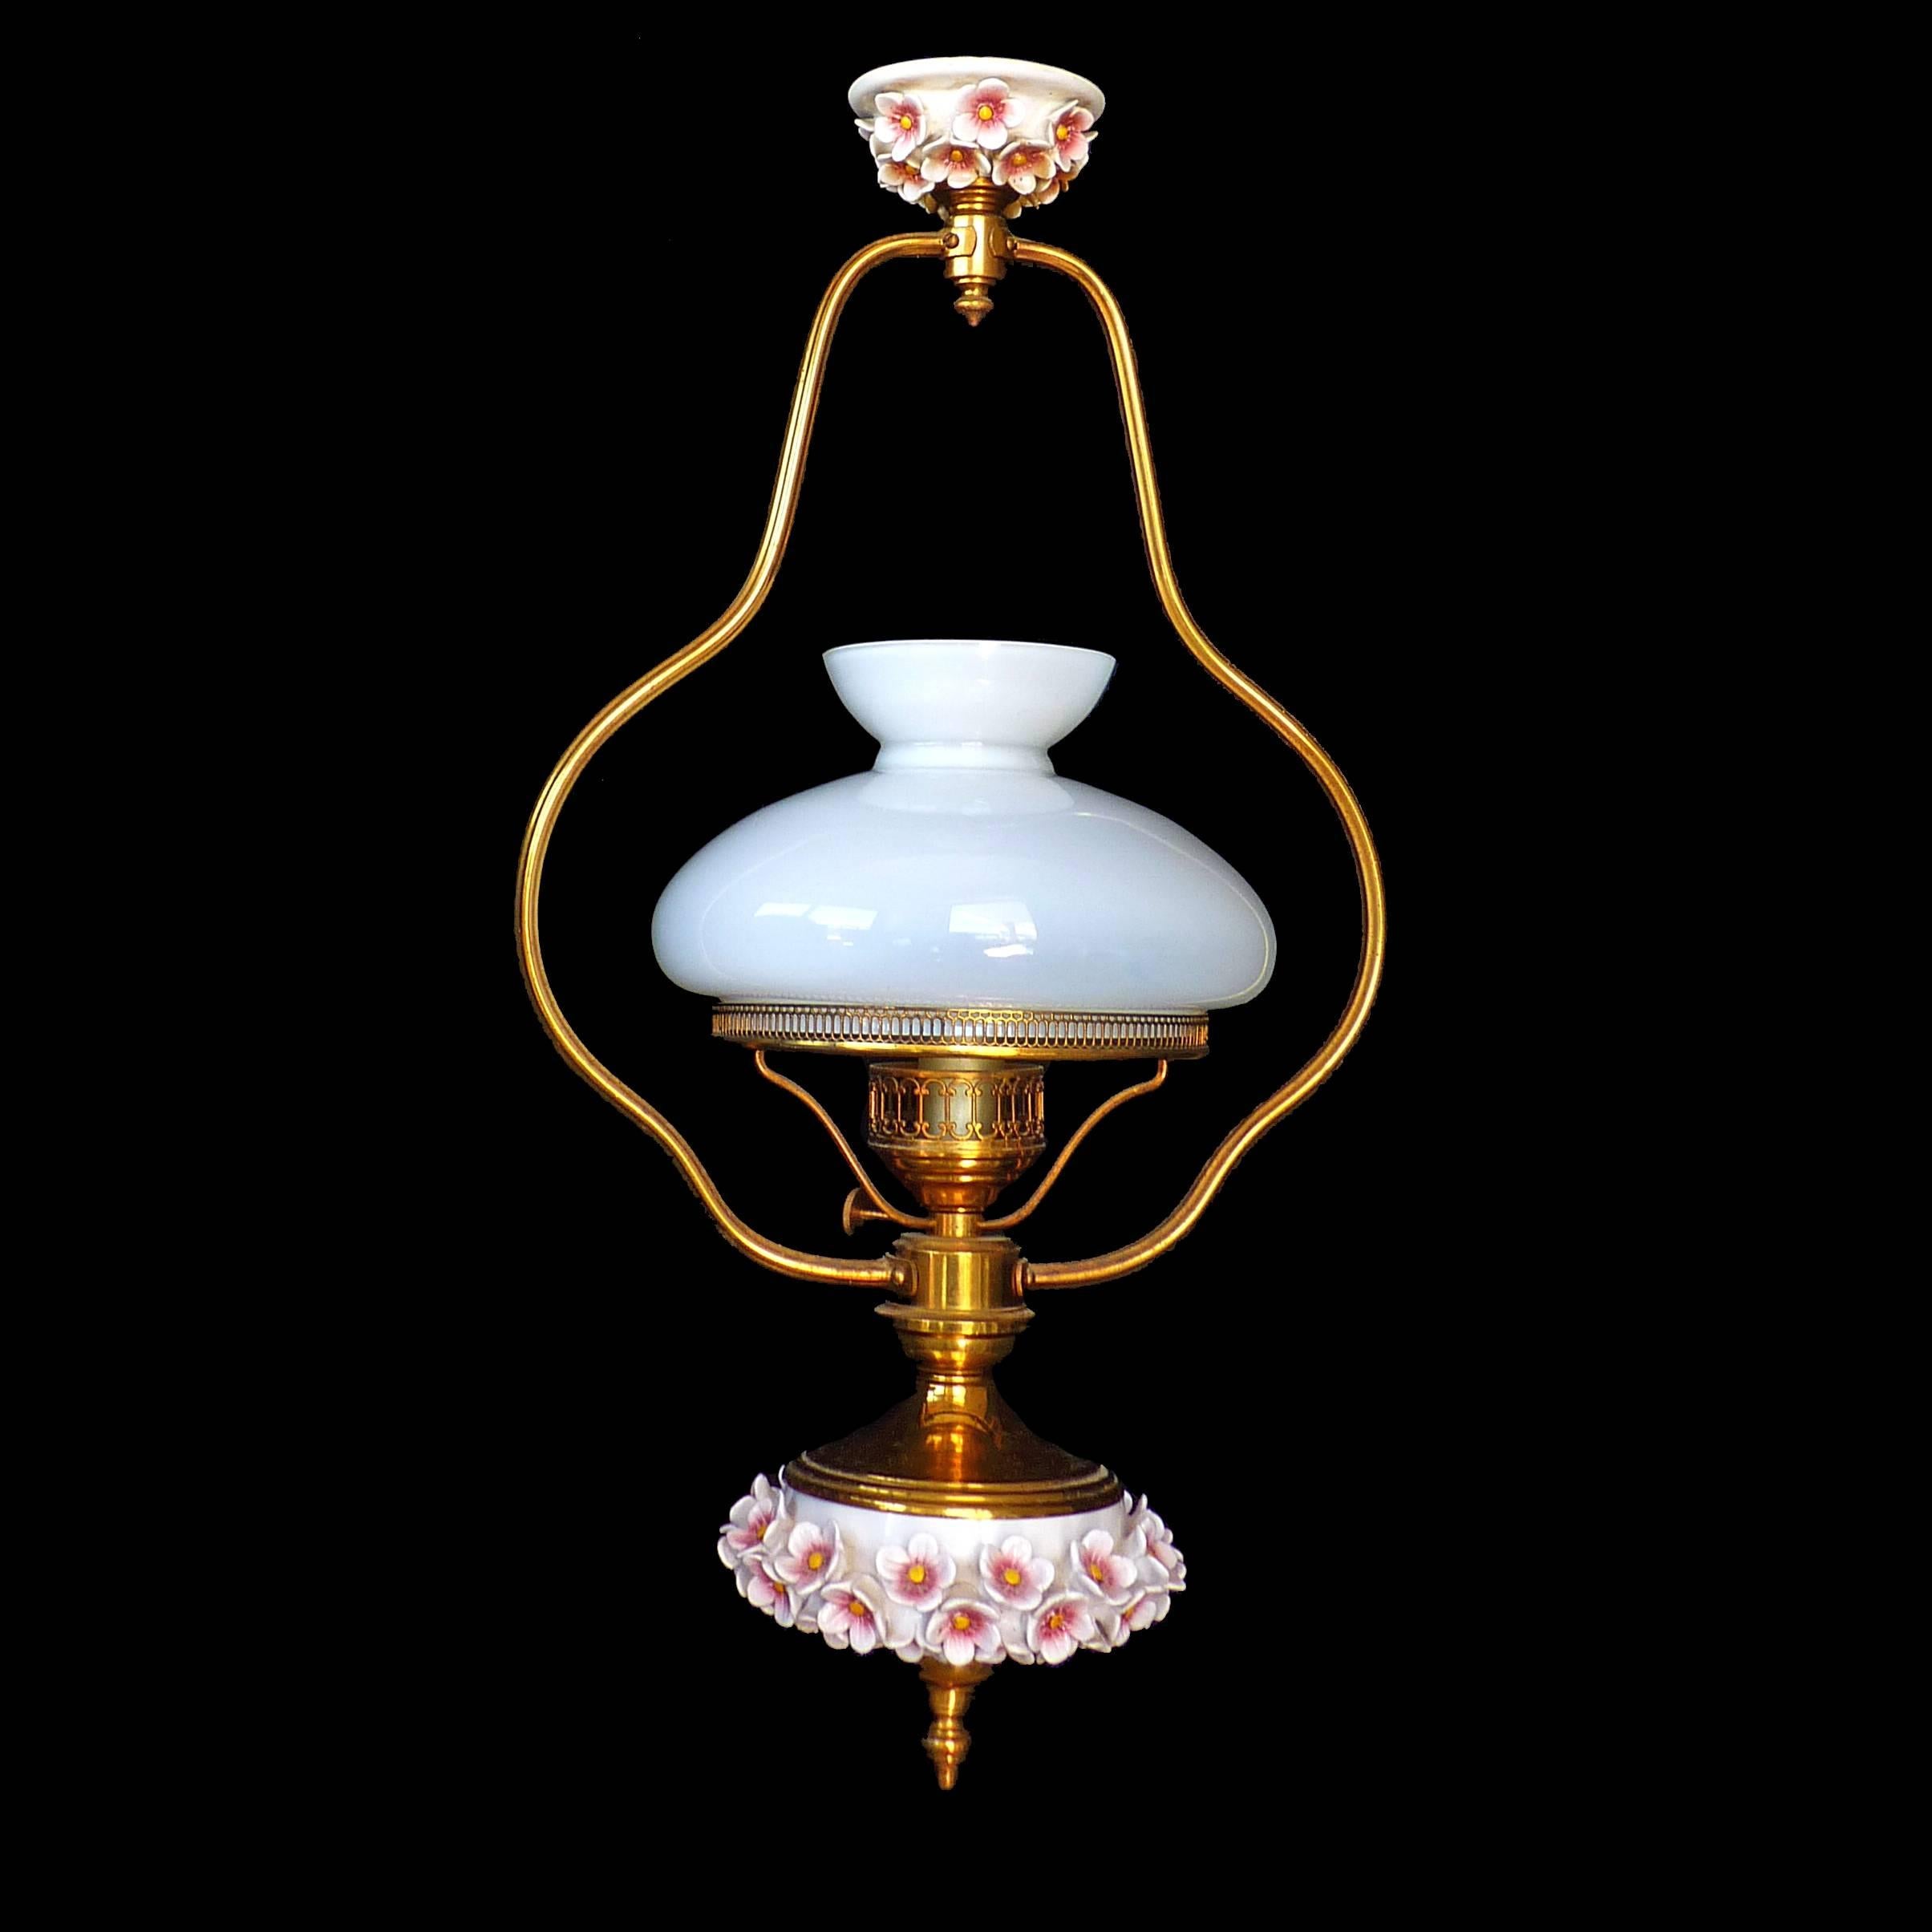 Appliqué French Pink Porcelain Flowers Chandelier/Gilt Victorian Library Hanging Oil Lamp